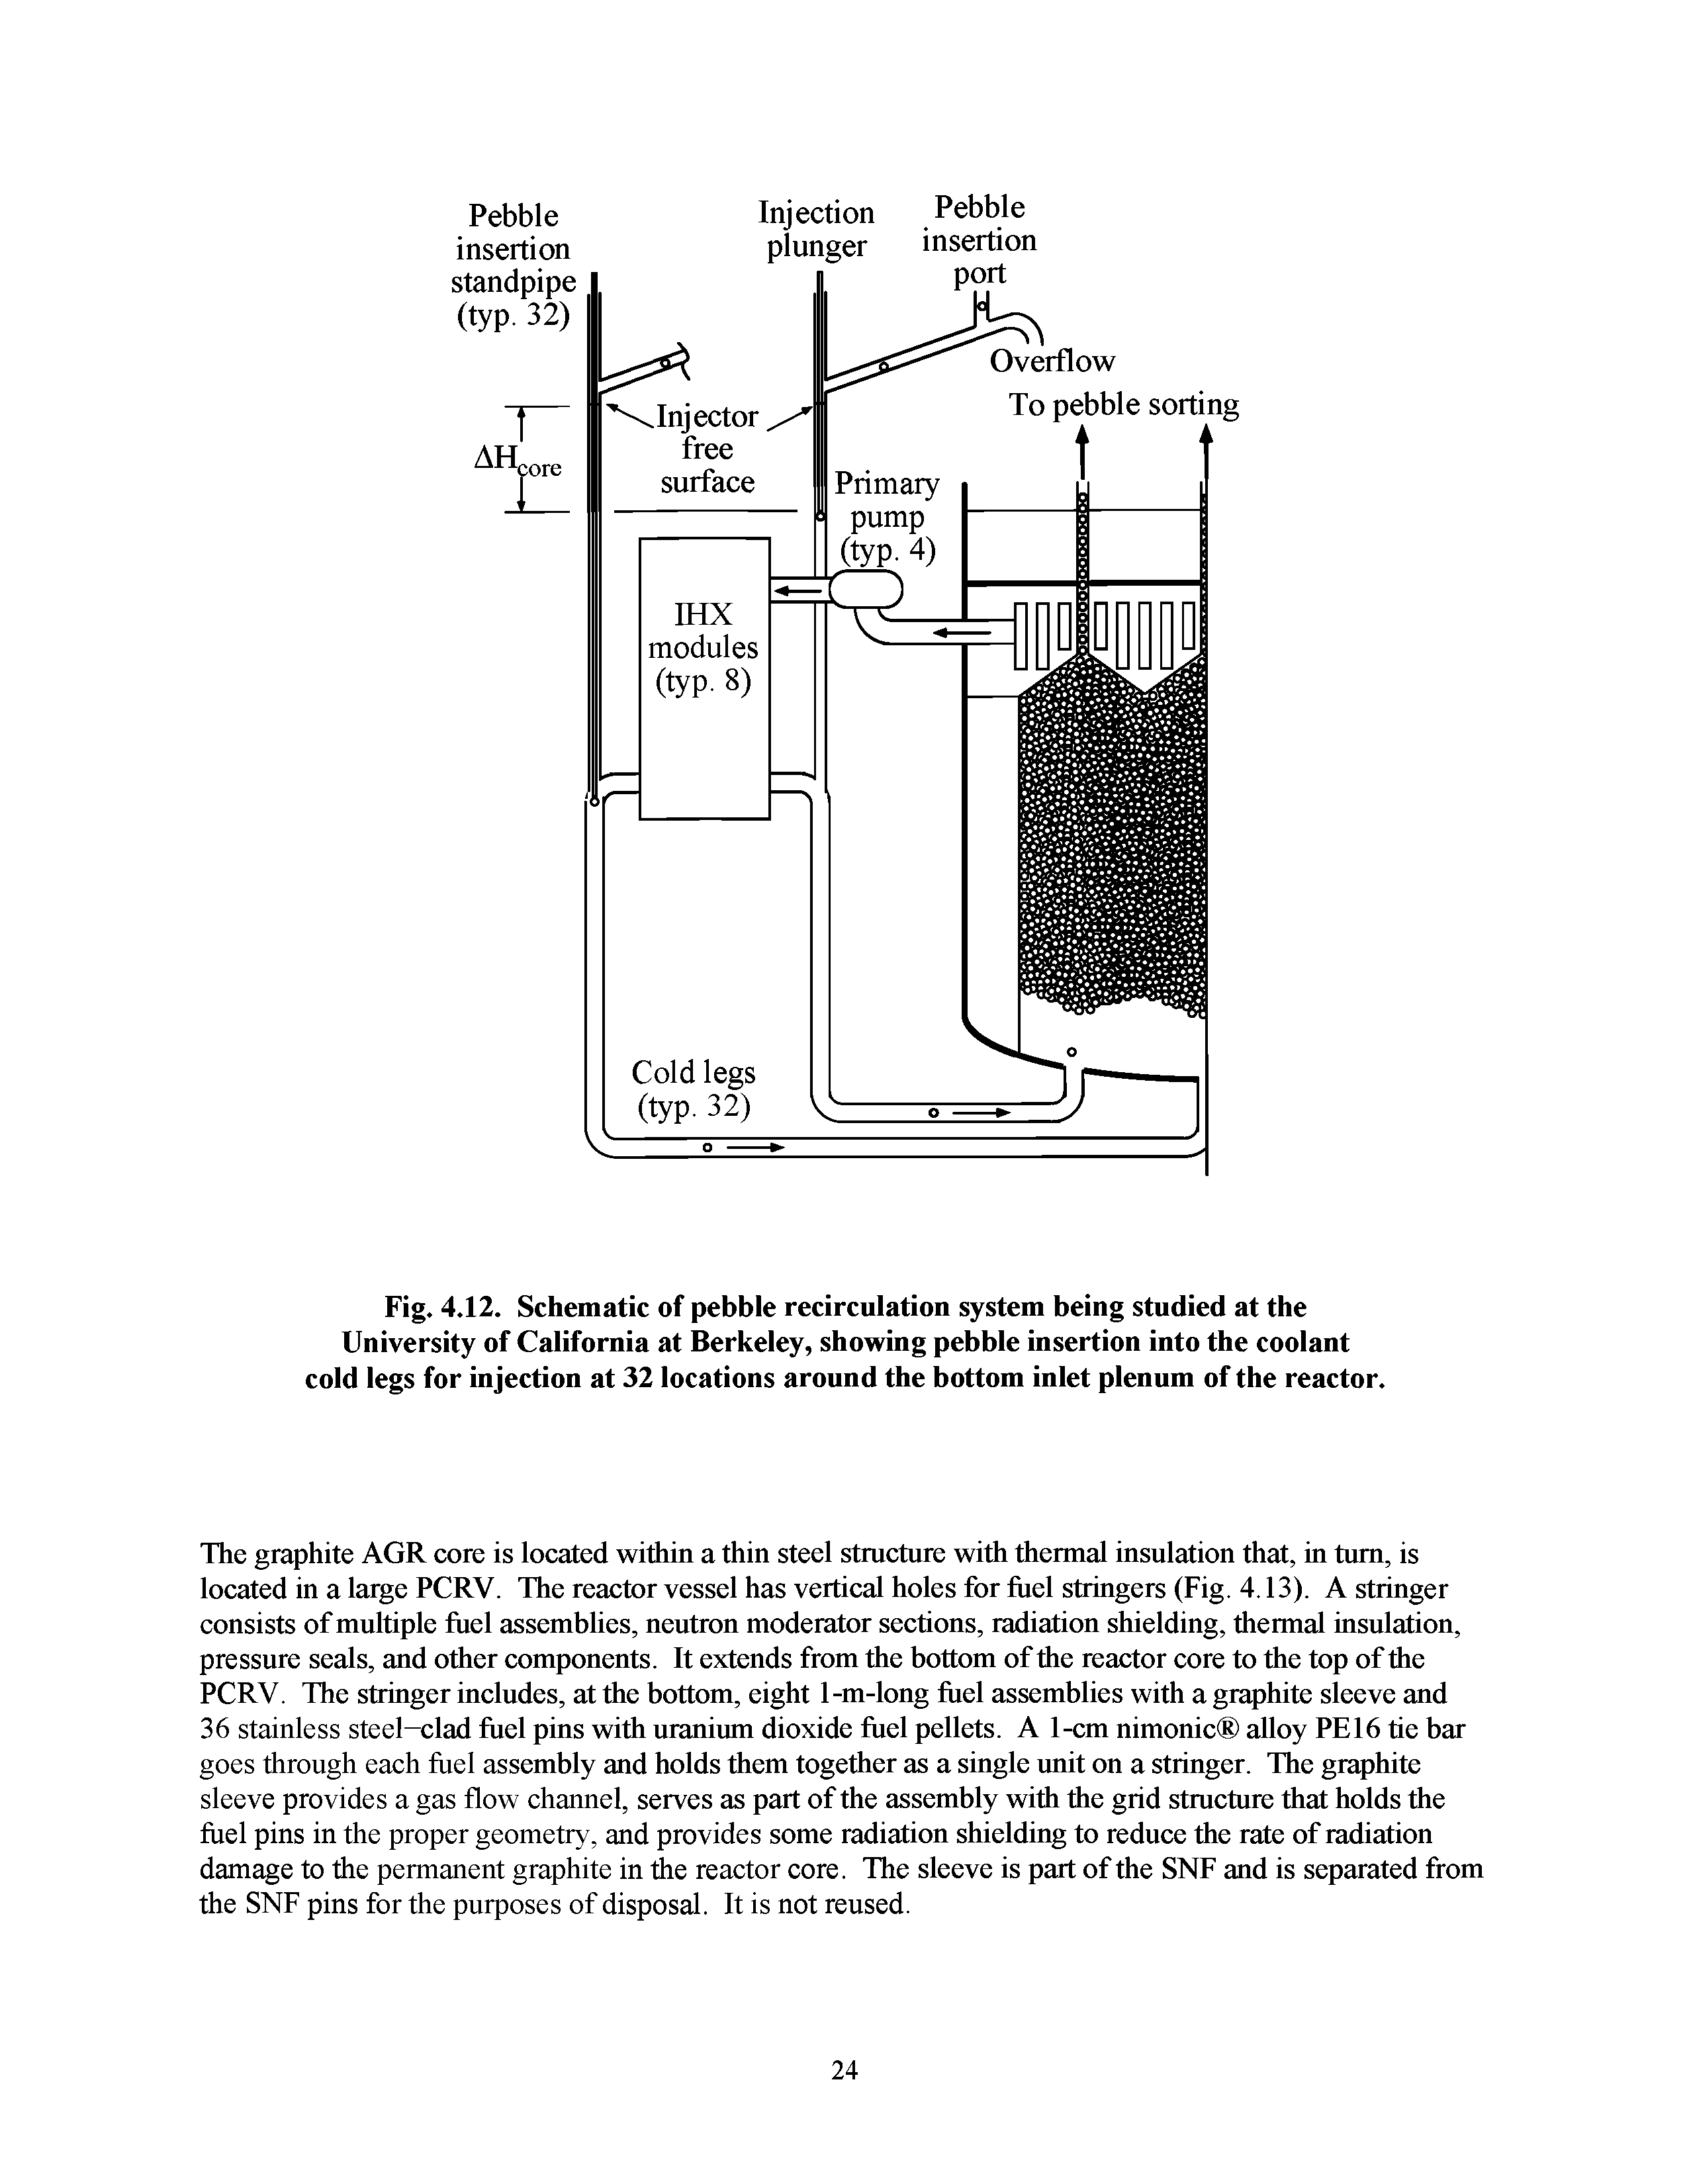 Fig. 4.12. Schematic of pebble recirculation system being studied at the University of California at Berkeley, showing pebble insertion into the coolant cold legs for injection at 32 locations around the bottom inlet plenum of the reactor.